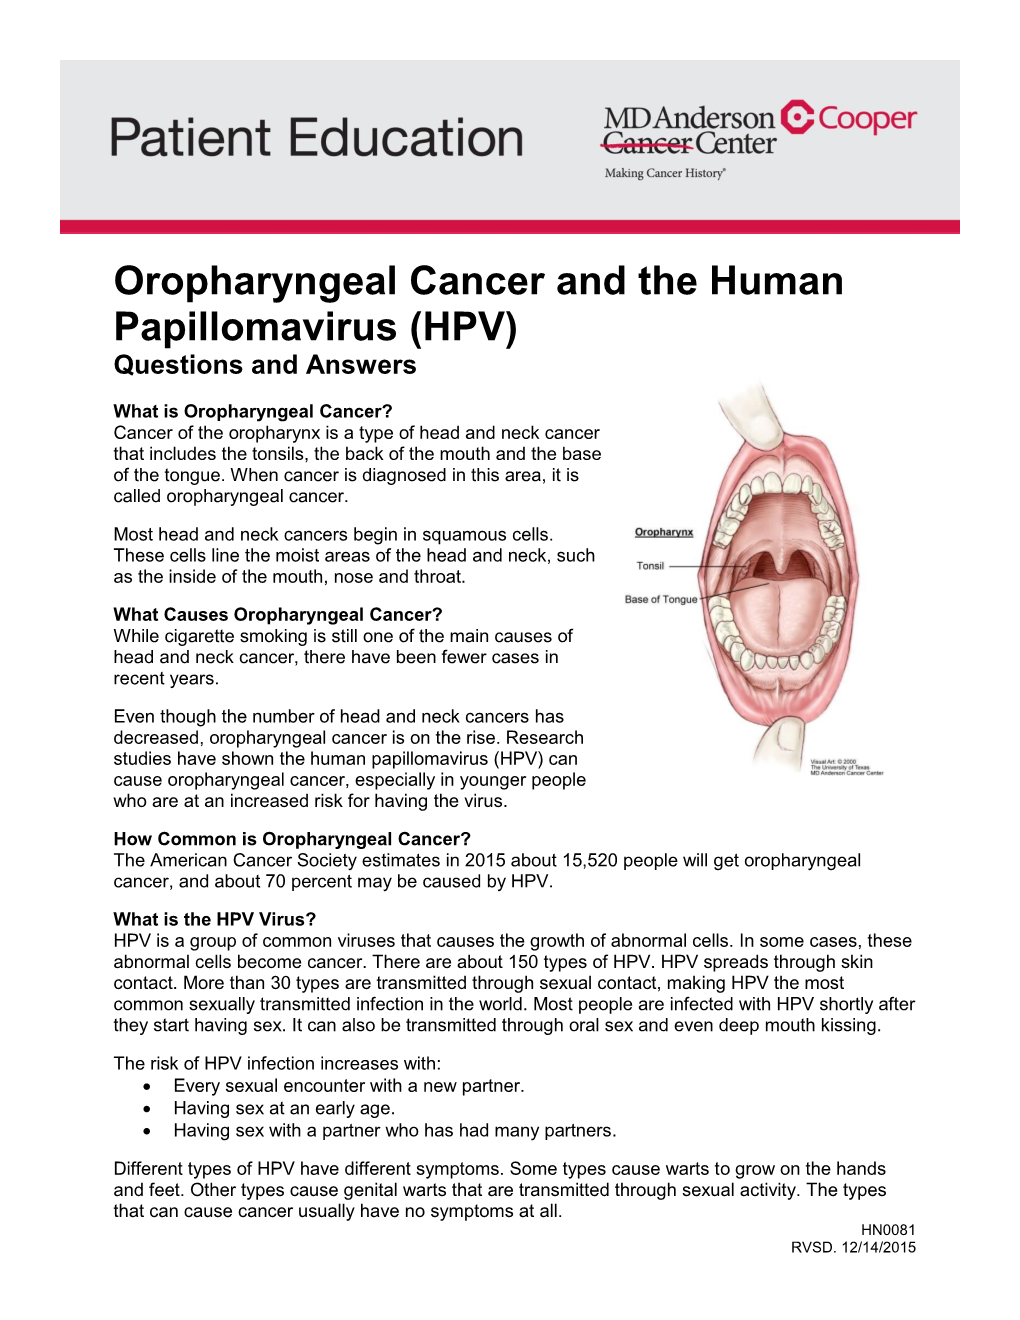 Oropharyngeal Cancer and the Human Papillomavirus (HPV) Questions and Answers